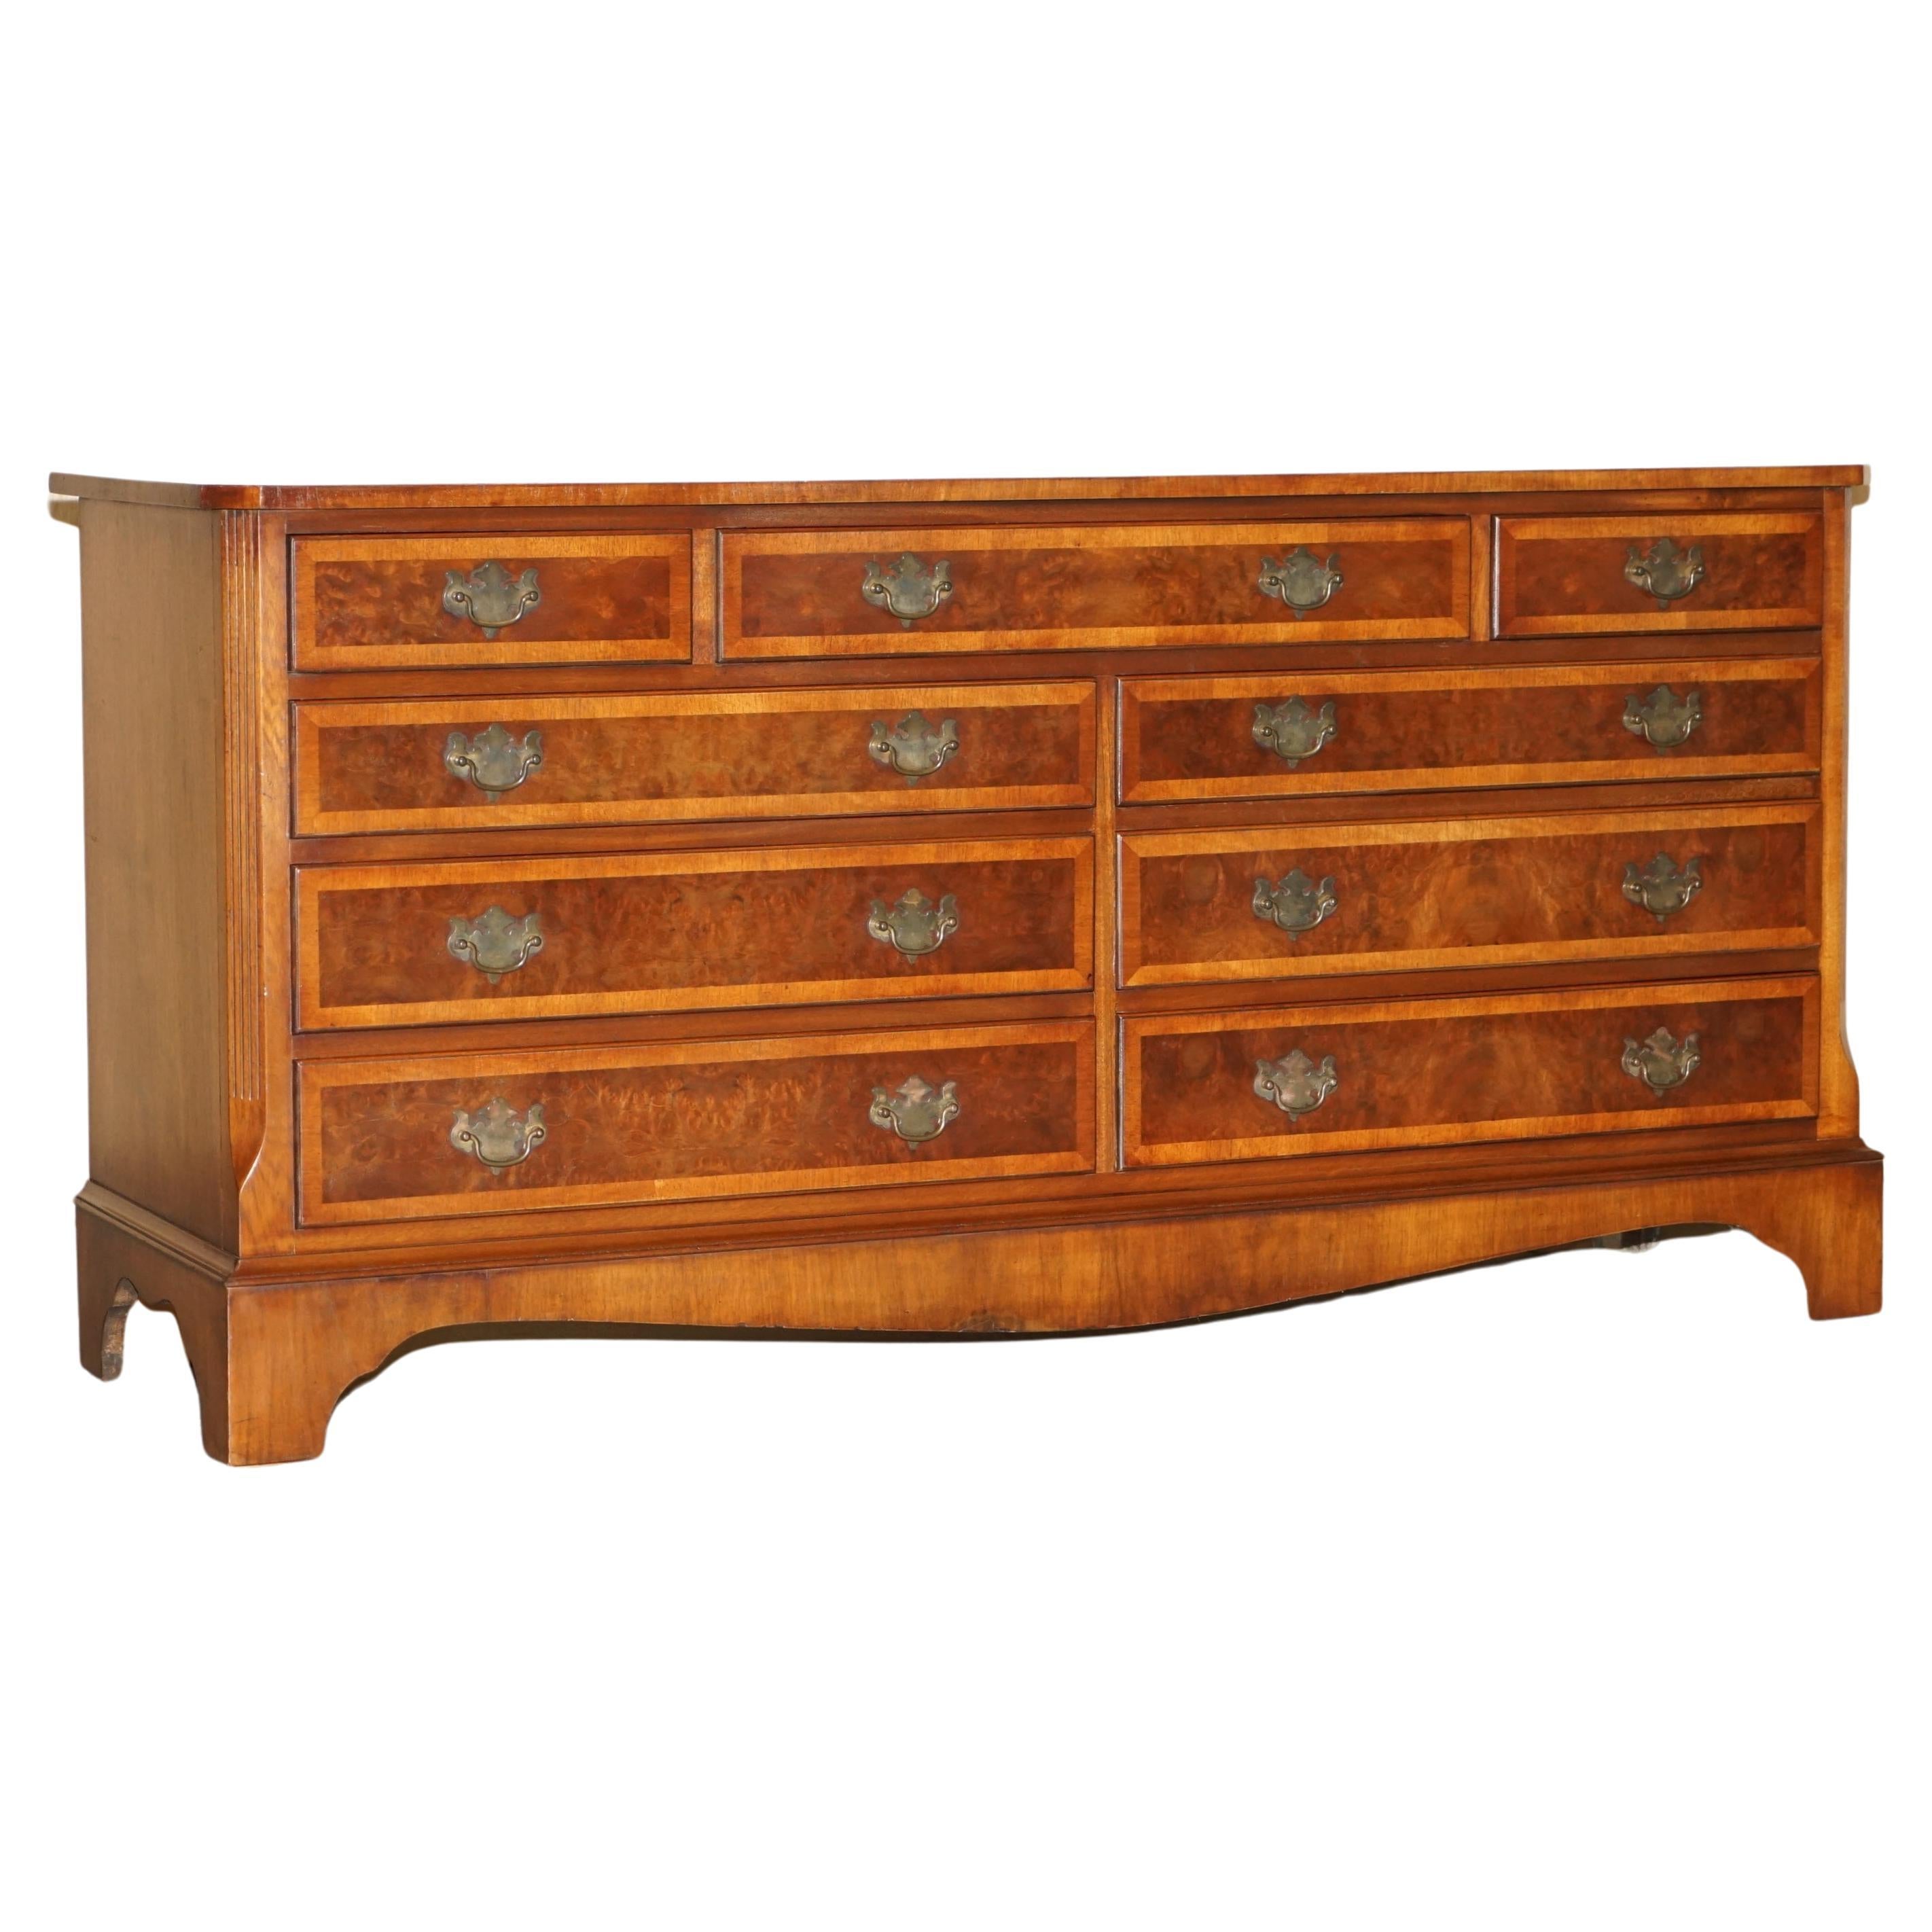 Georgian Style Sideboard Sized Bank or Chest of Drawers in Burr & Burl Walnut For Sale